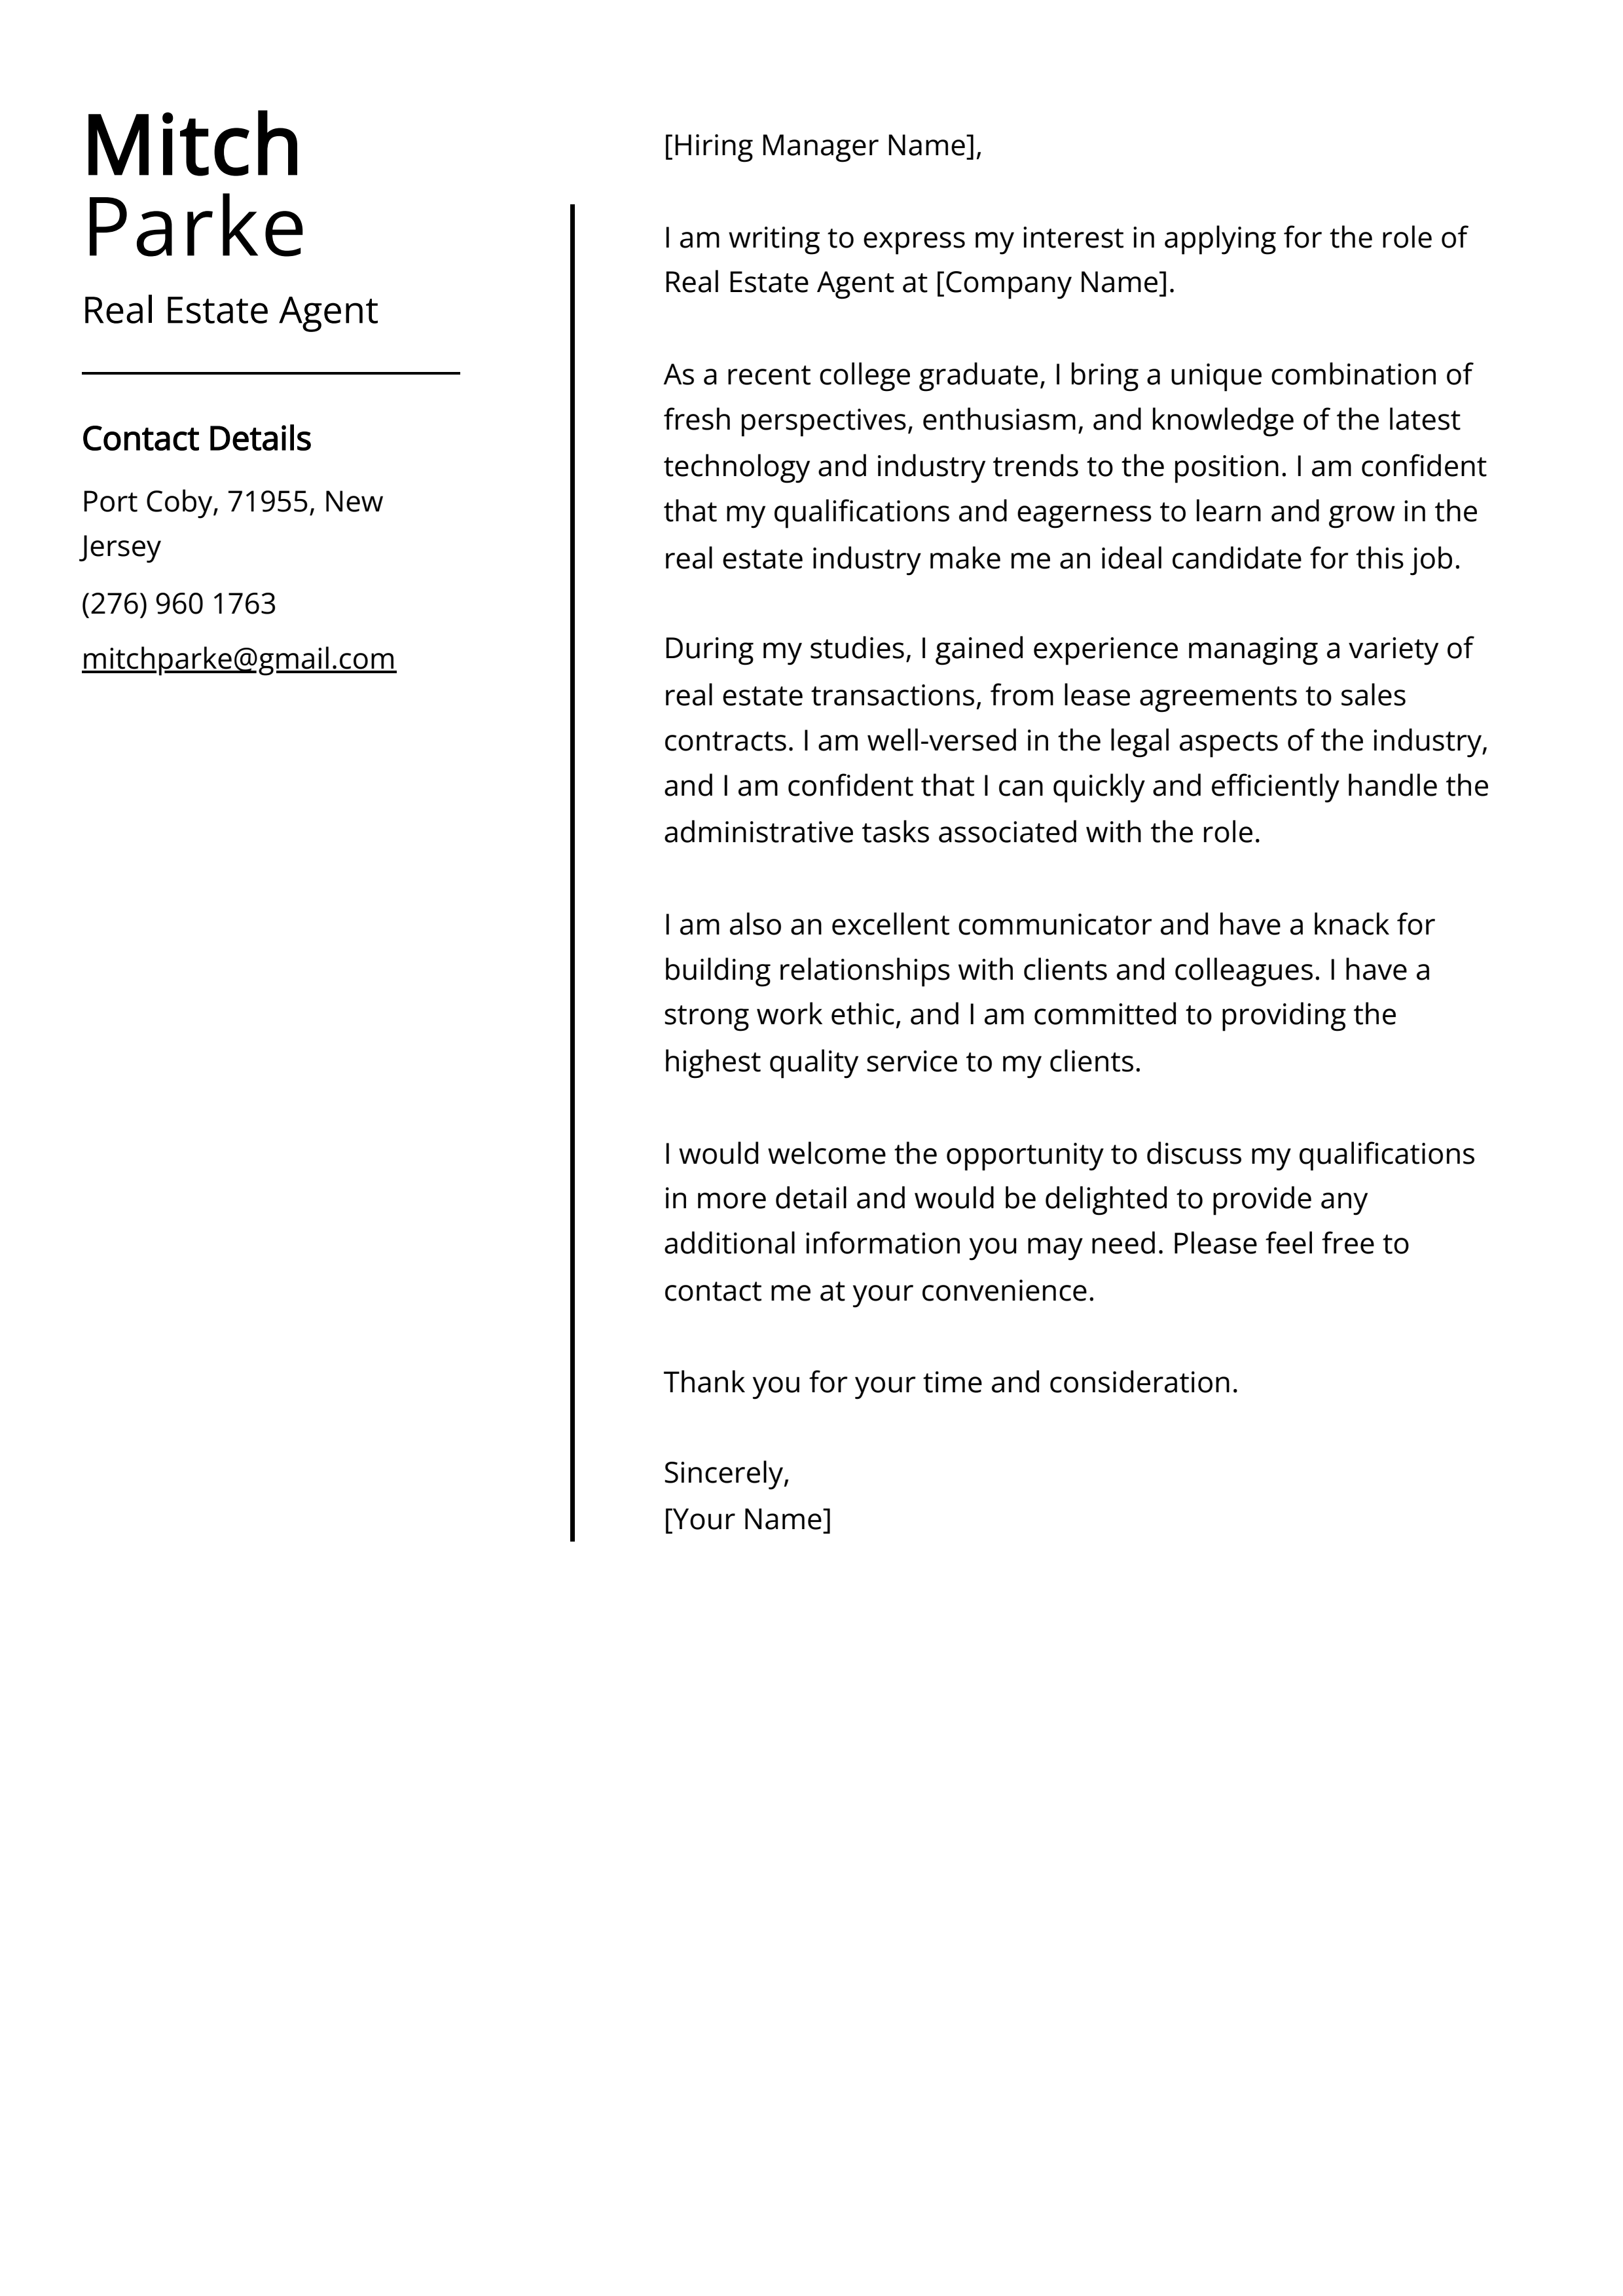 Real Estate Agent Cover Letter Example